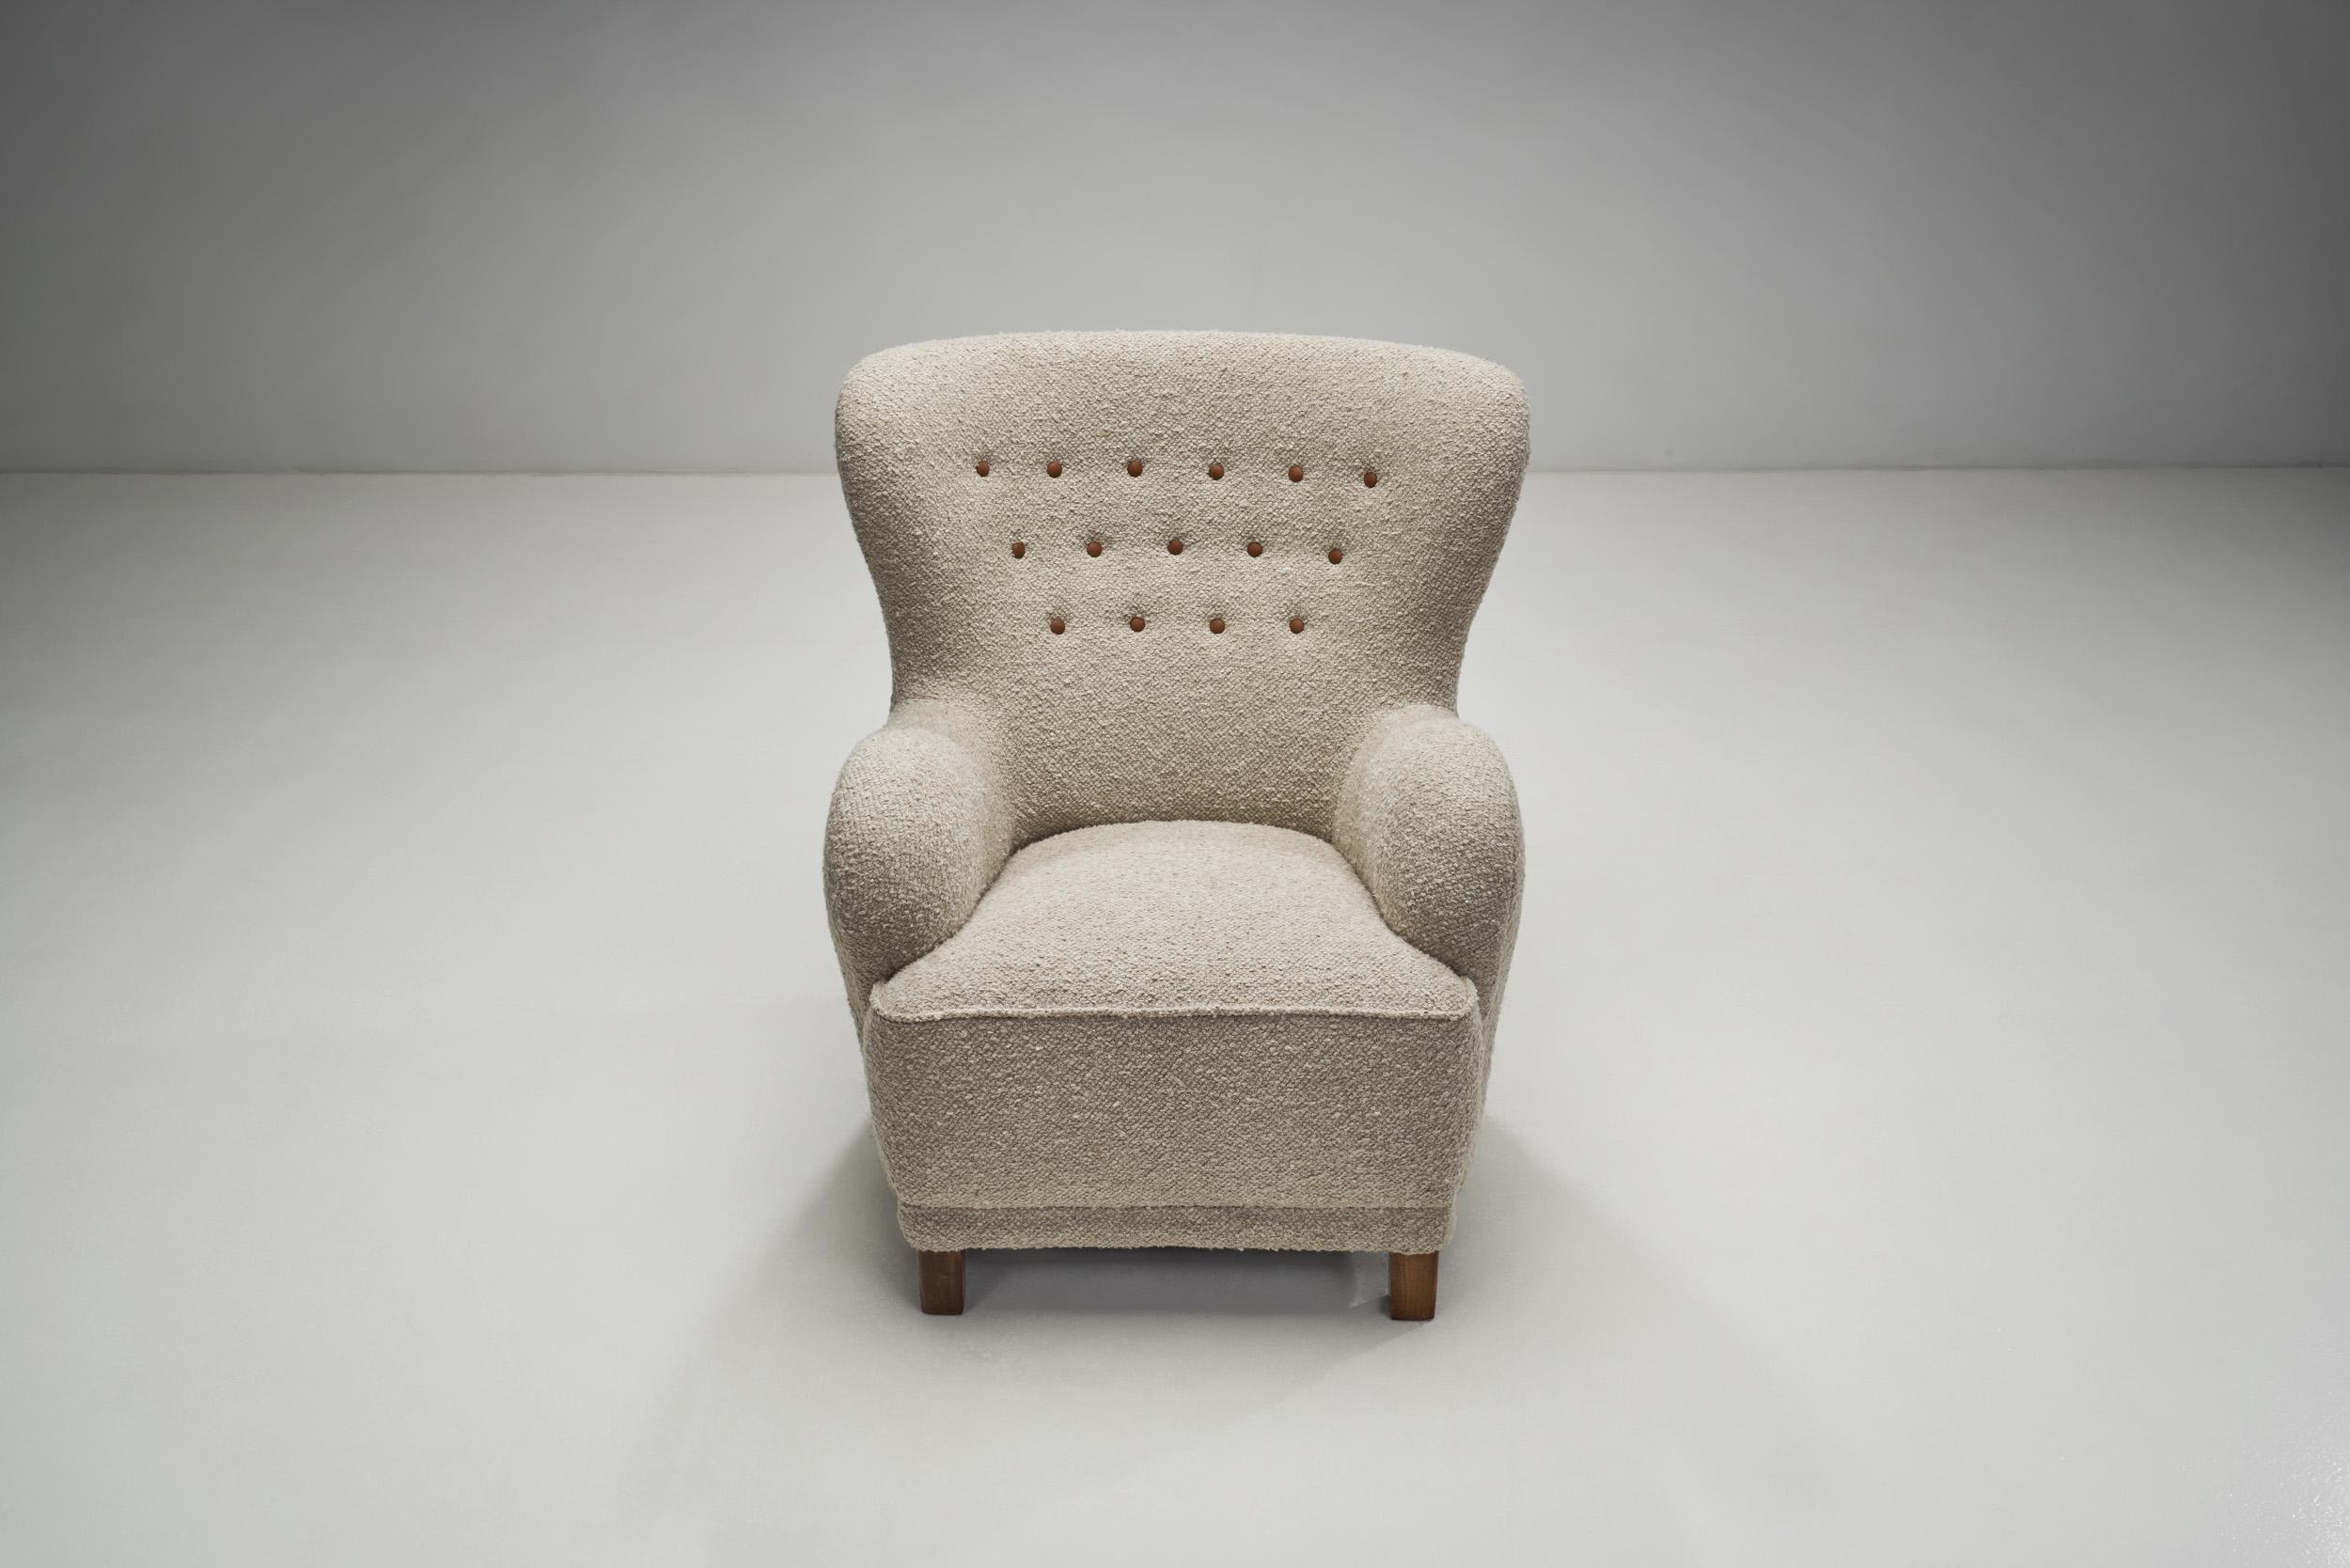 Fabric Danish Cabinetmaker Upholstered Armchair with Stained Beech Legs, Denmark, 1940s